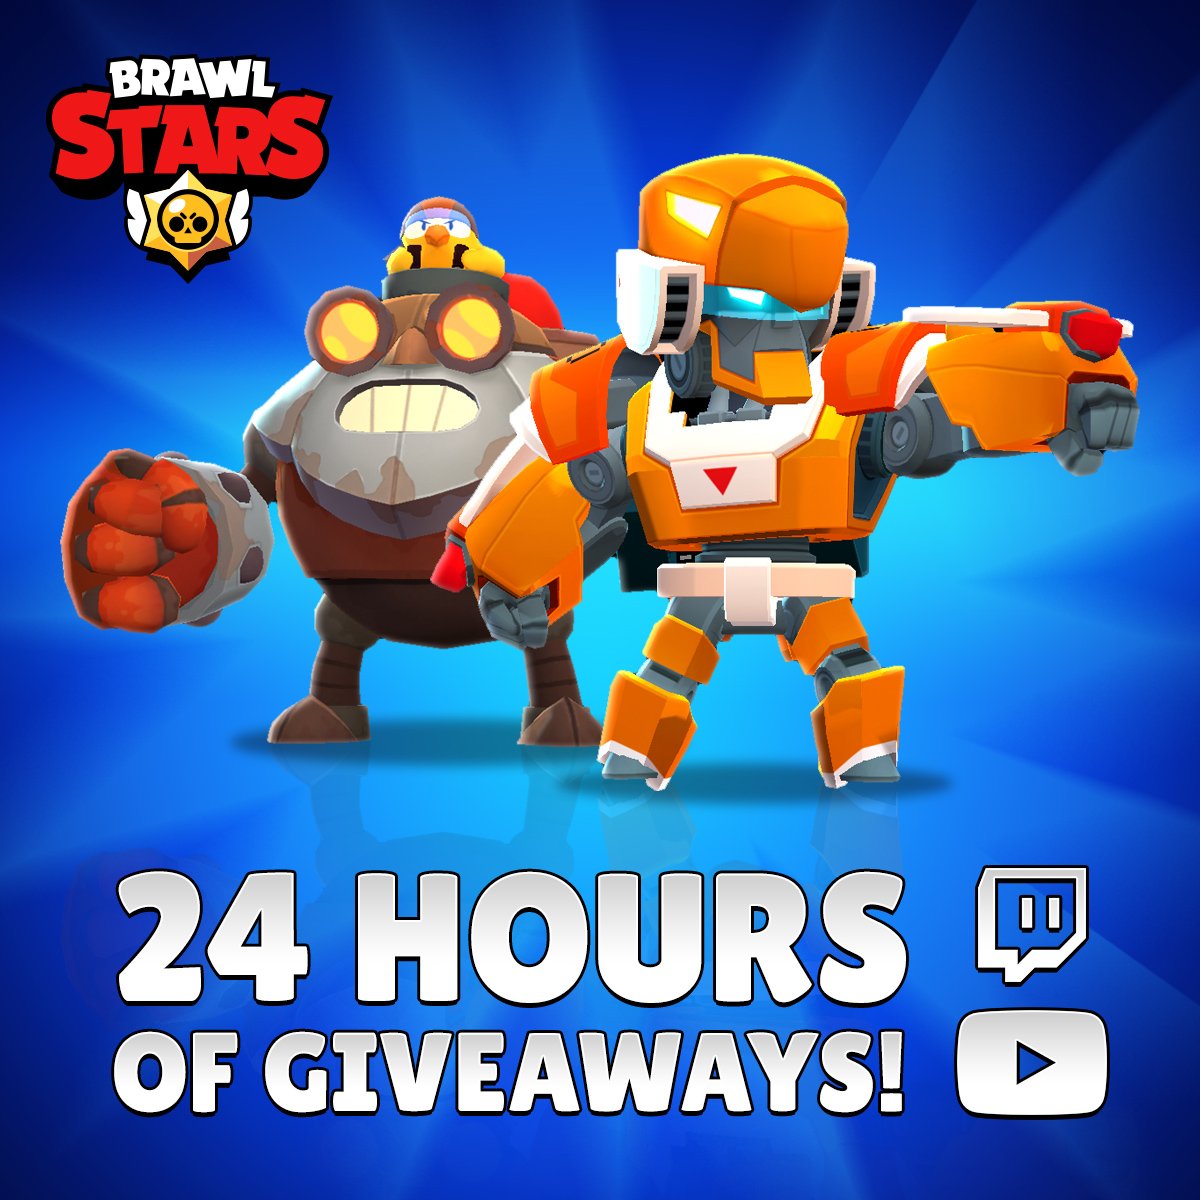 Brawl Stars Sur Twitter Retweet For A Chance To Winbrawlskins But If You Don T Get Lucky Don T Worry This Sunday July 14th More Than 30 Streamers Will Be Hosting Giveaways - how to get original brawl star skins